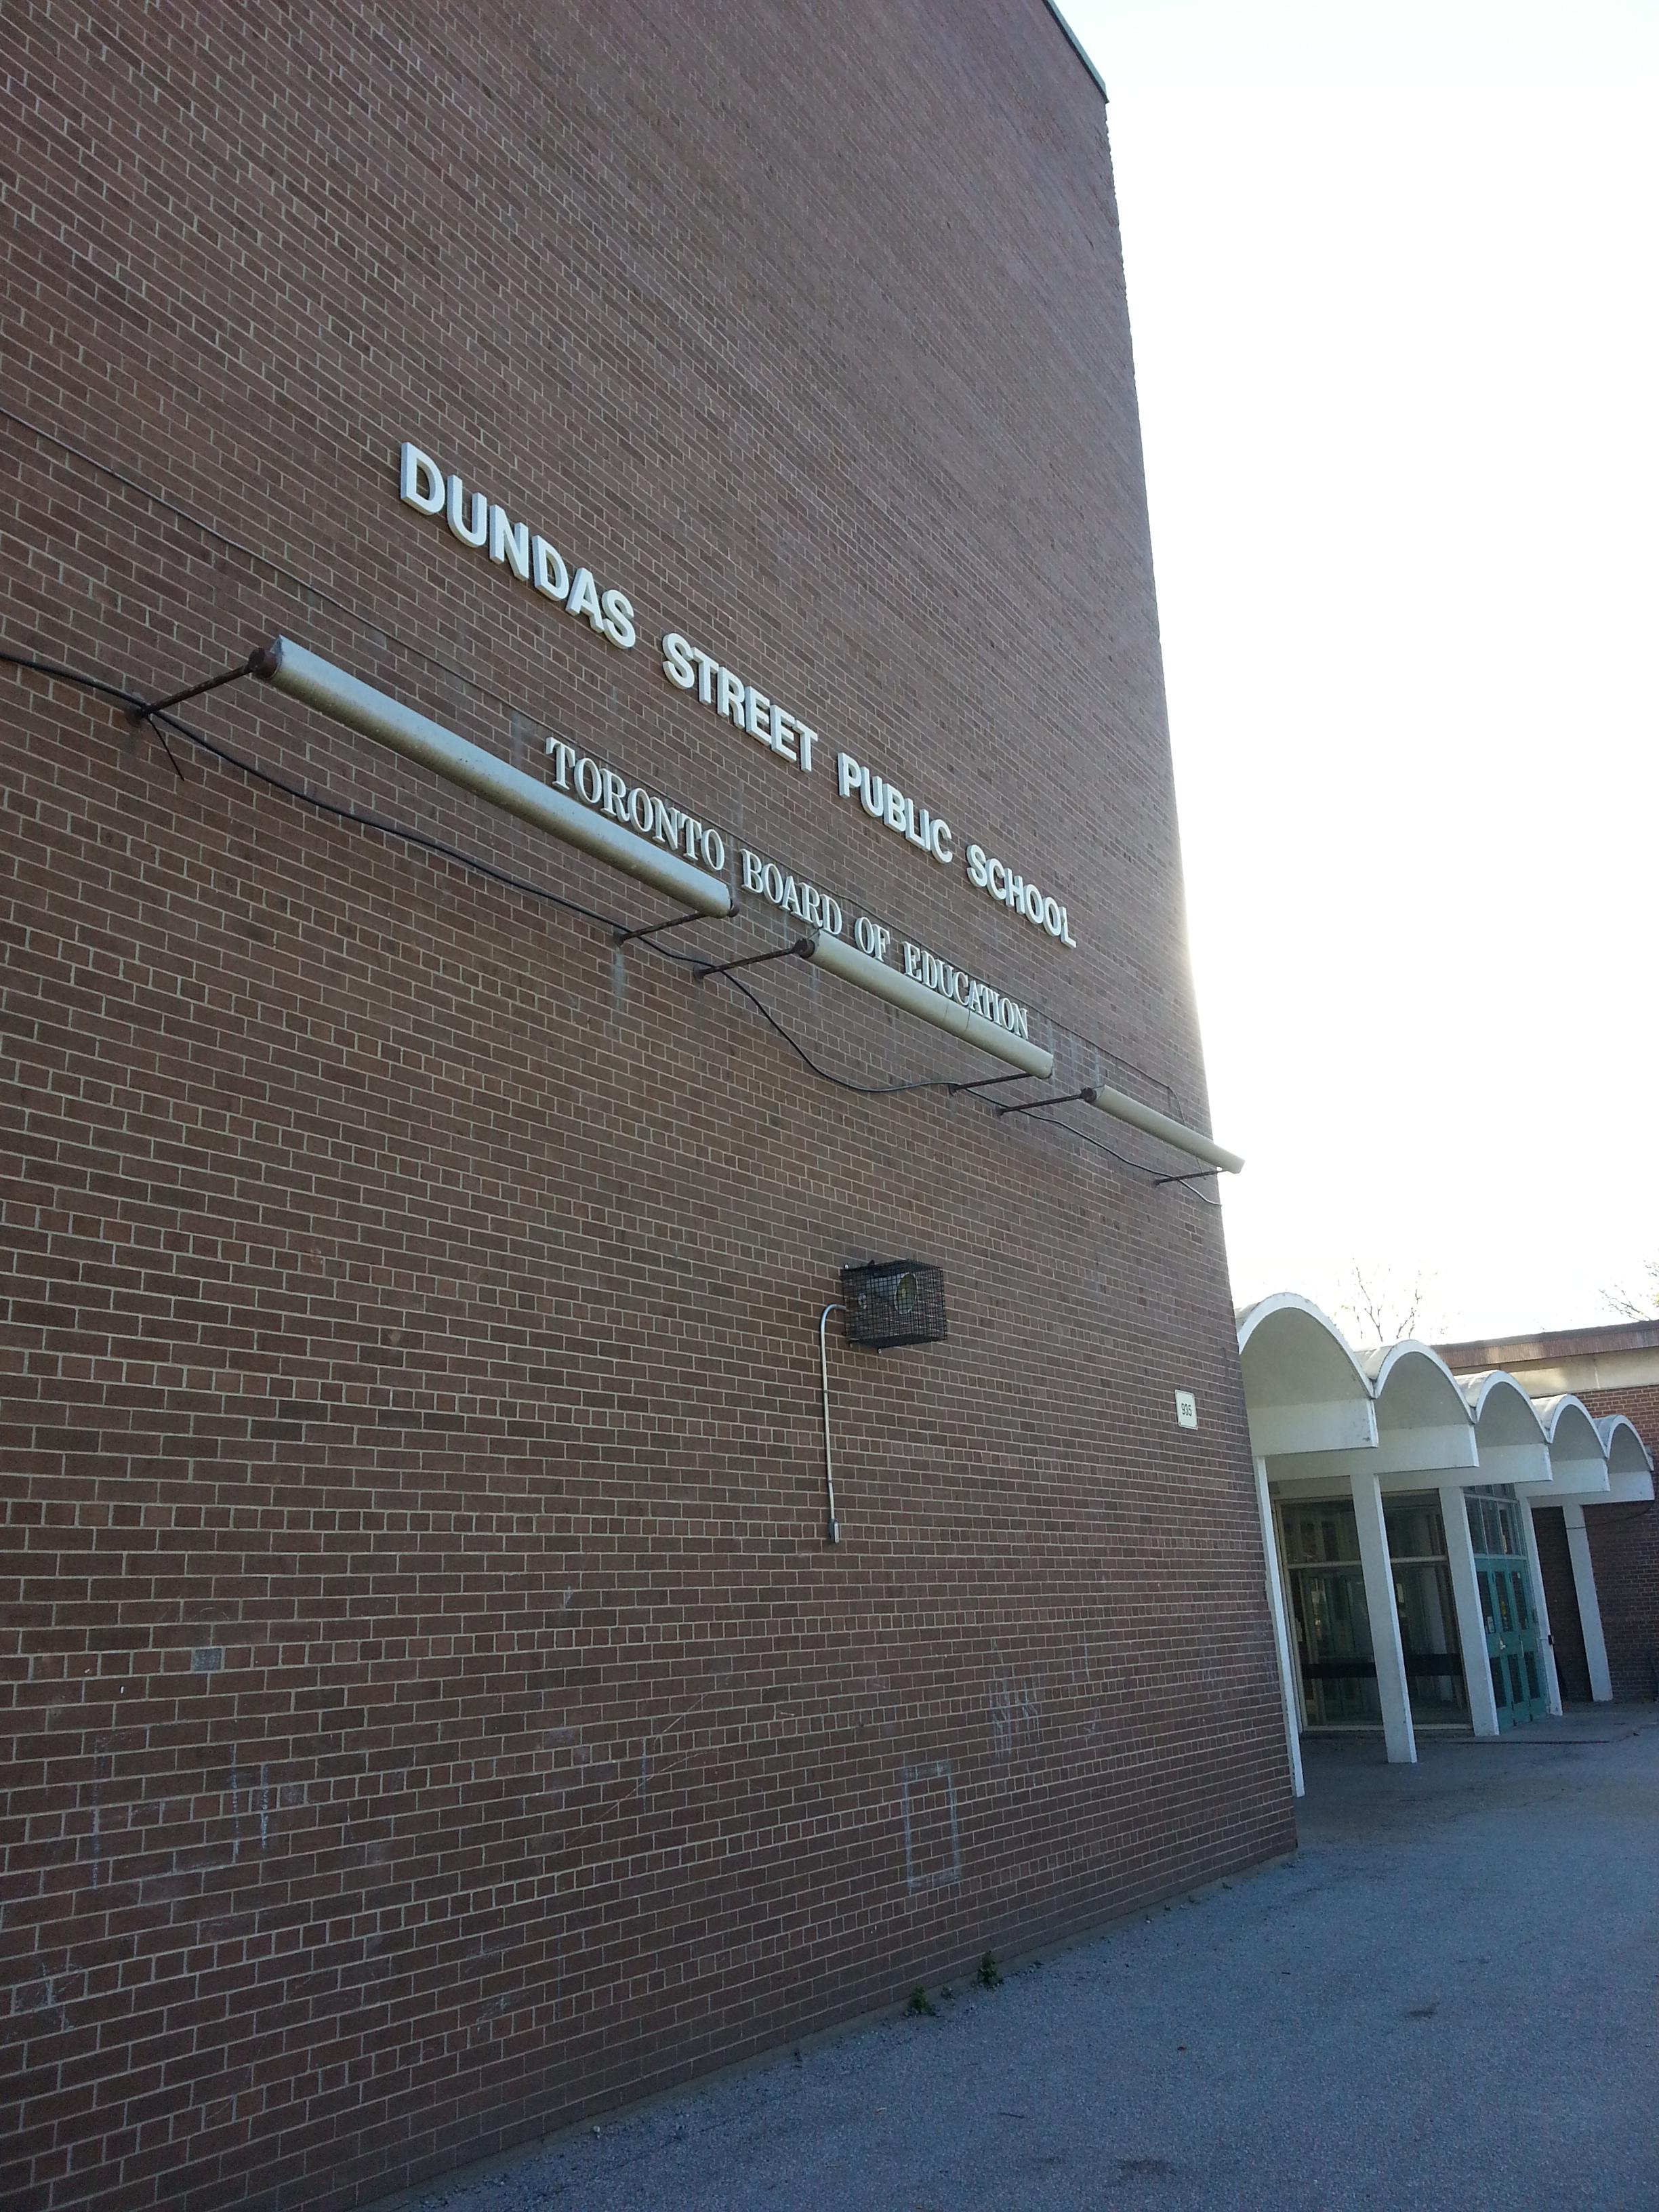 Photo of the front of the building and school name